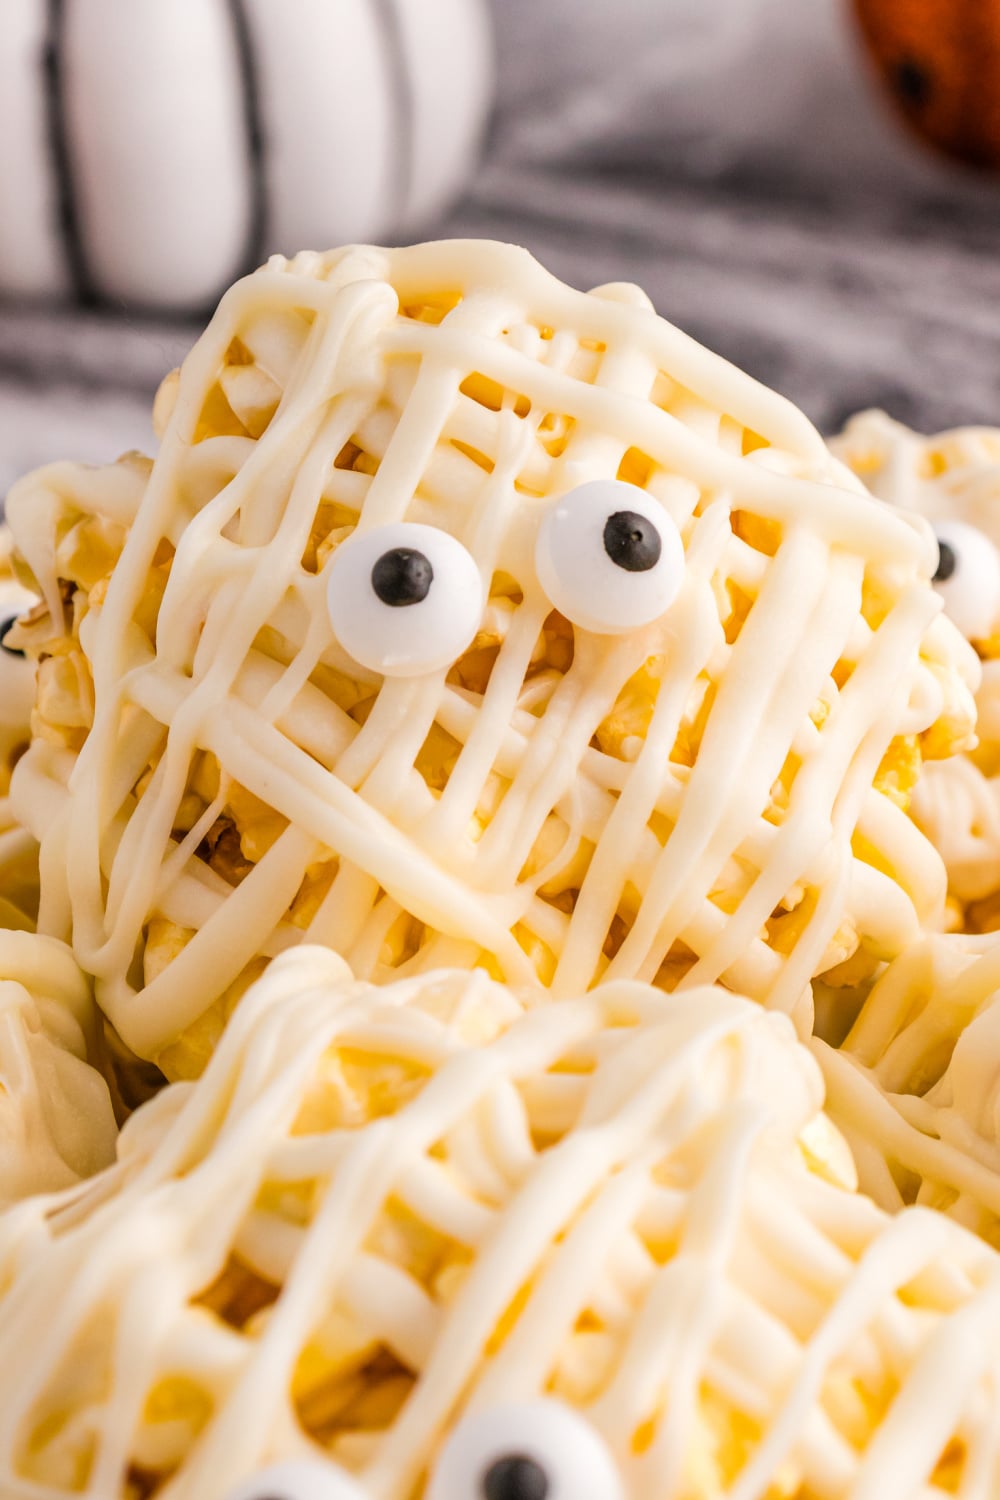 A popcorn ball drizzled in white chocolate to resemble a mummy sits on a plate with other popcorn balls.